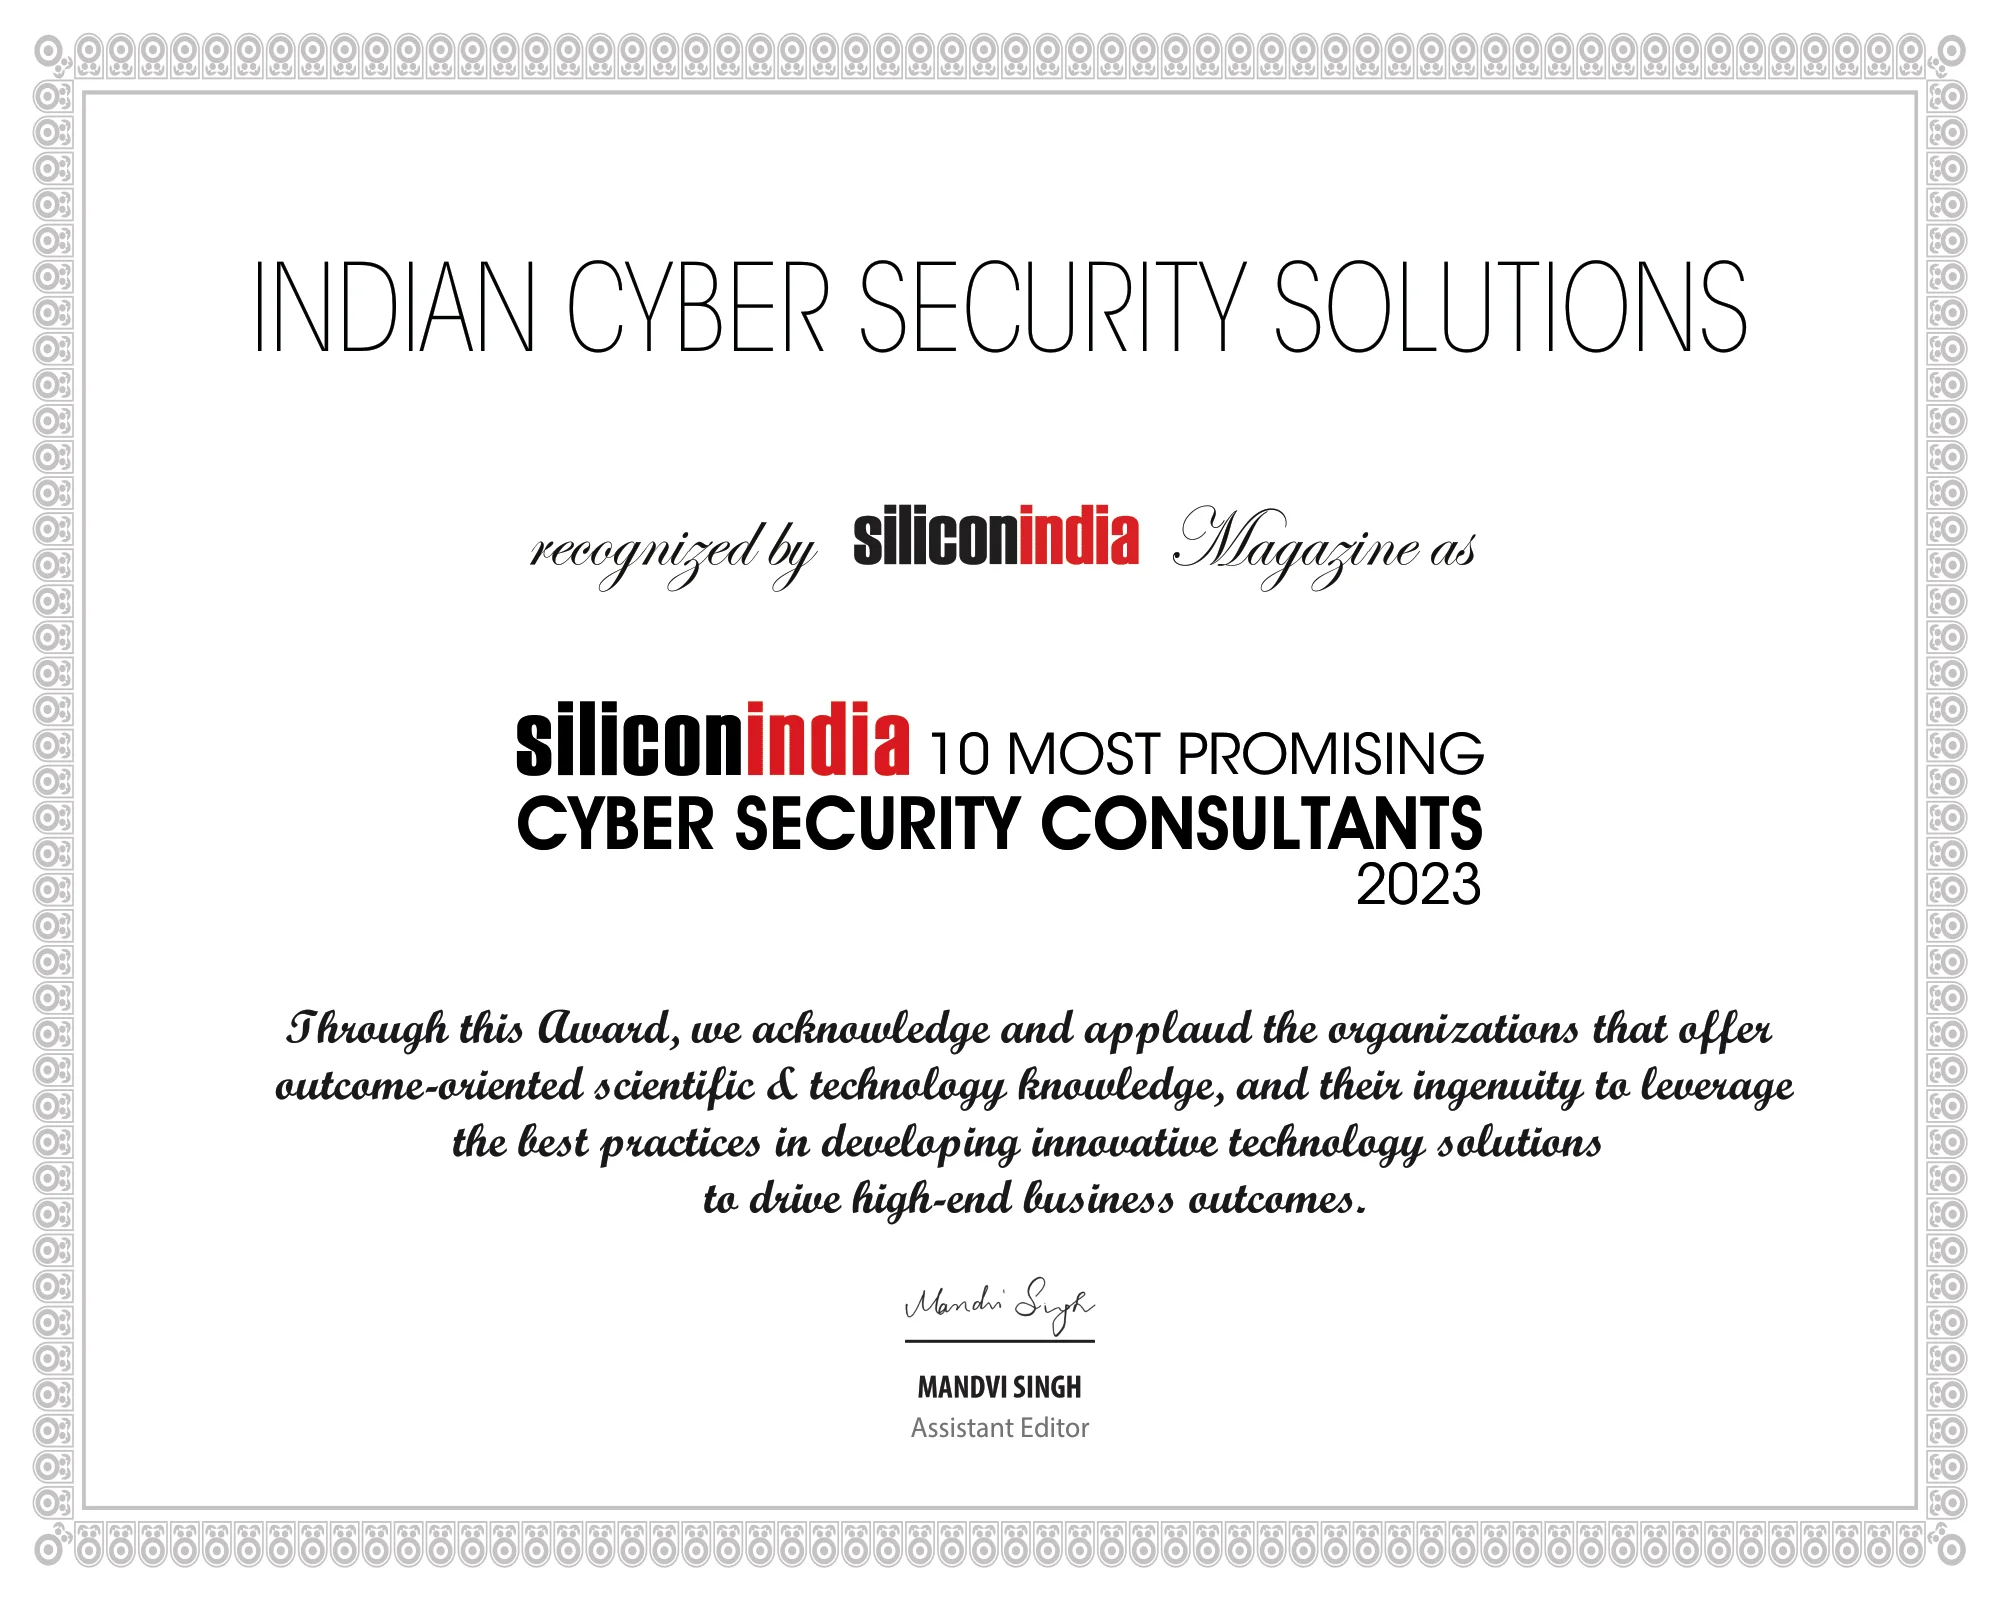 CompTIA Security+ Certification Training in India